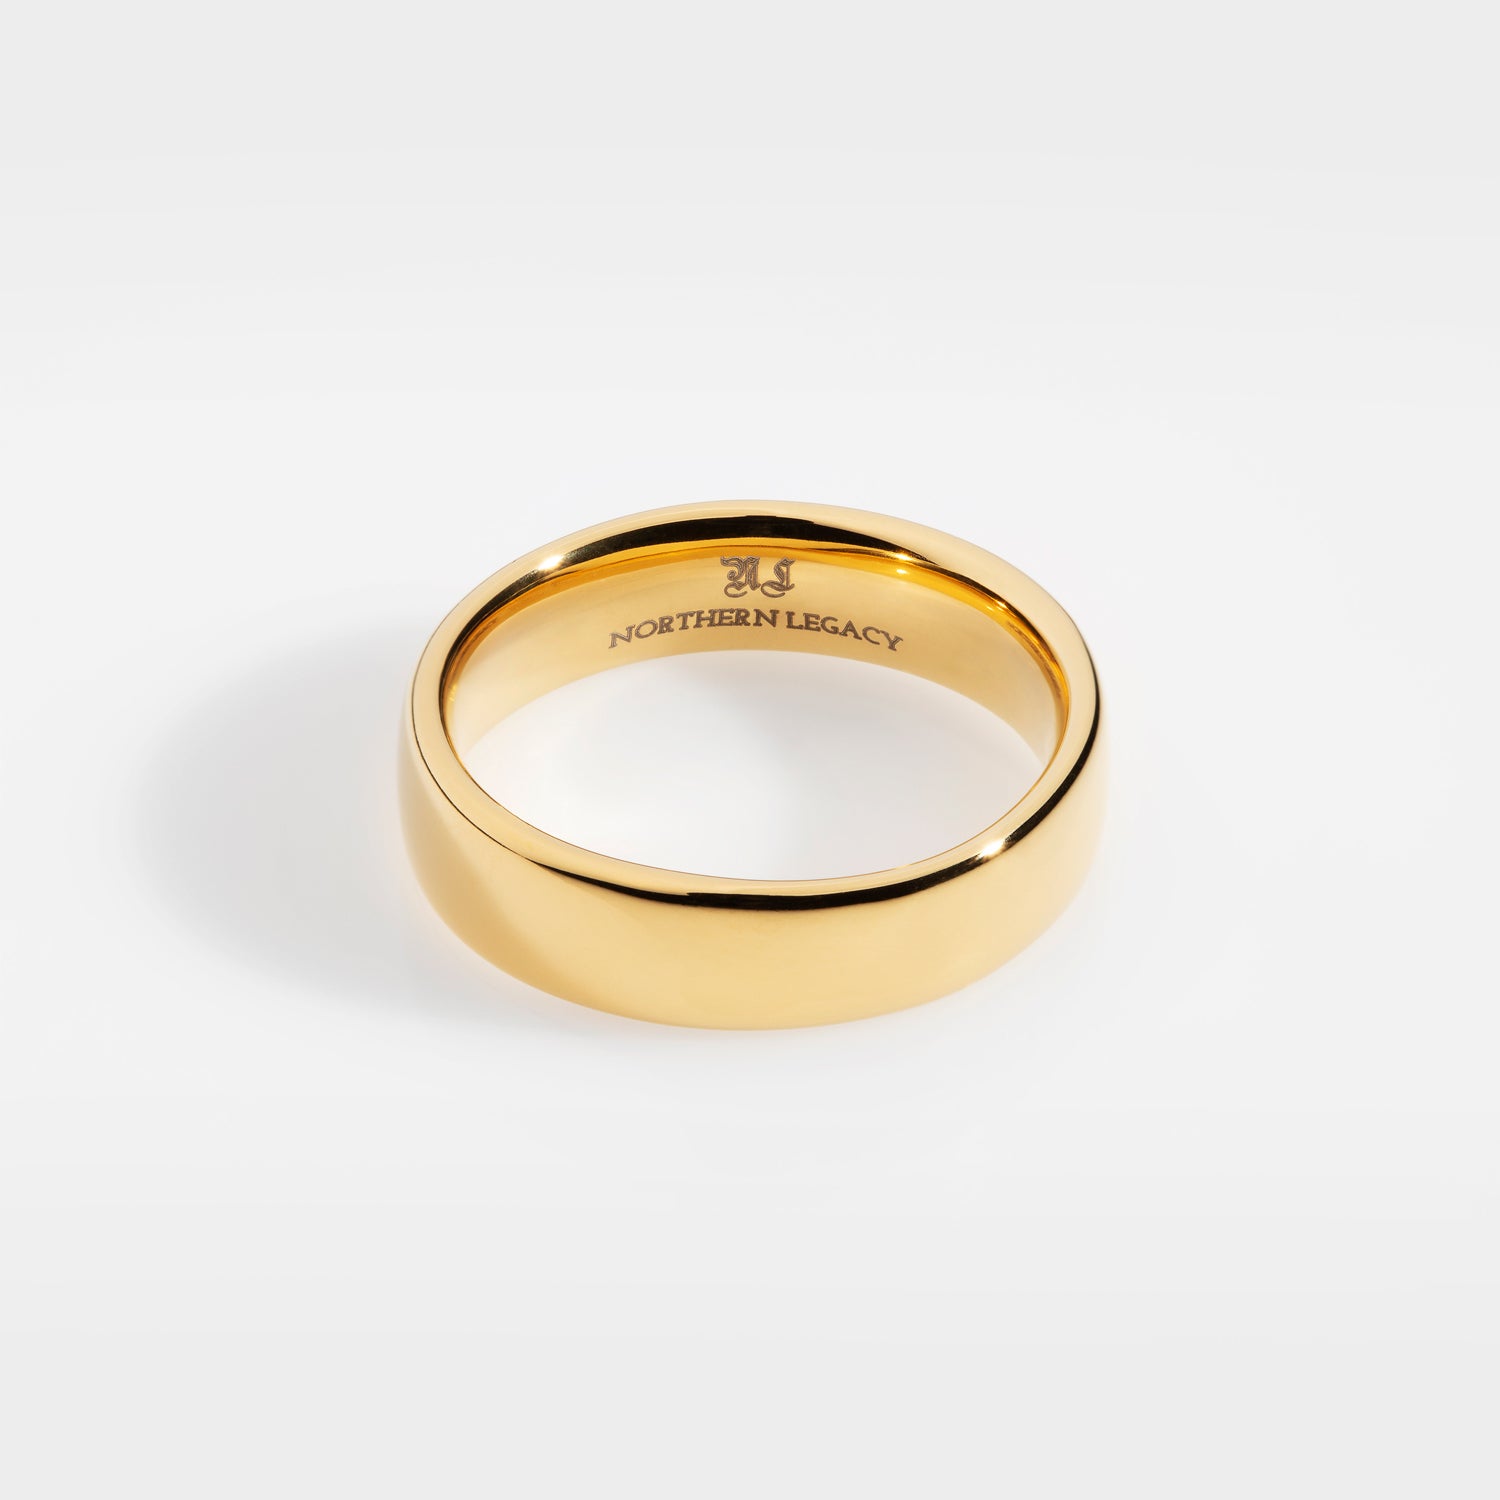 Siempre band - Gold-toned ring